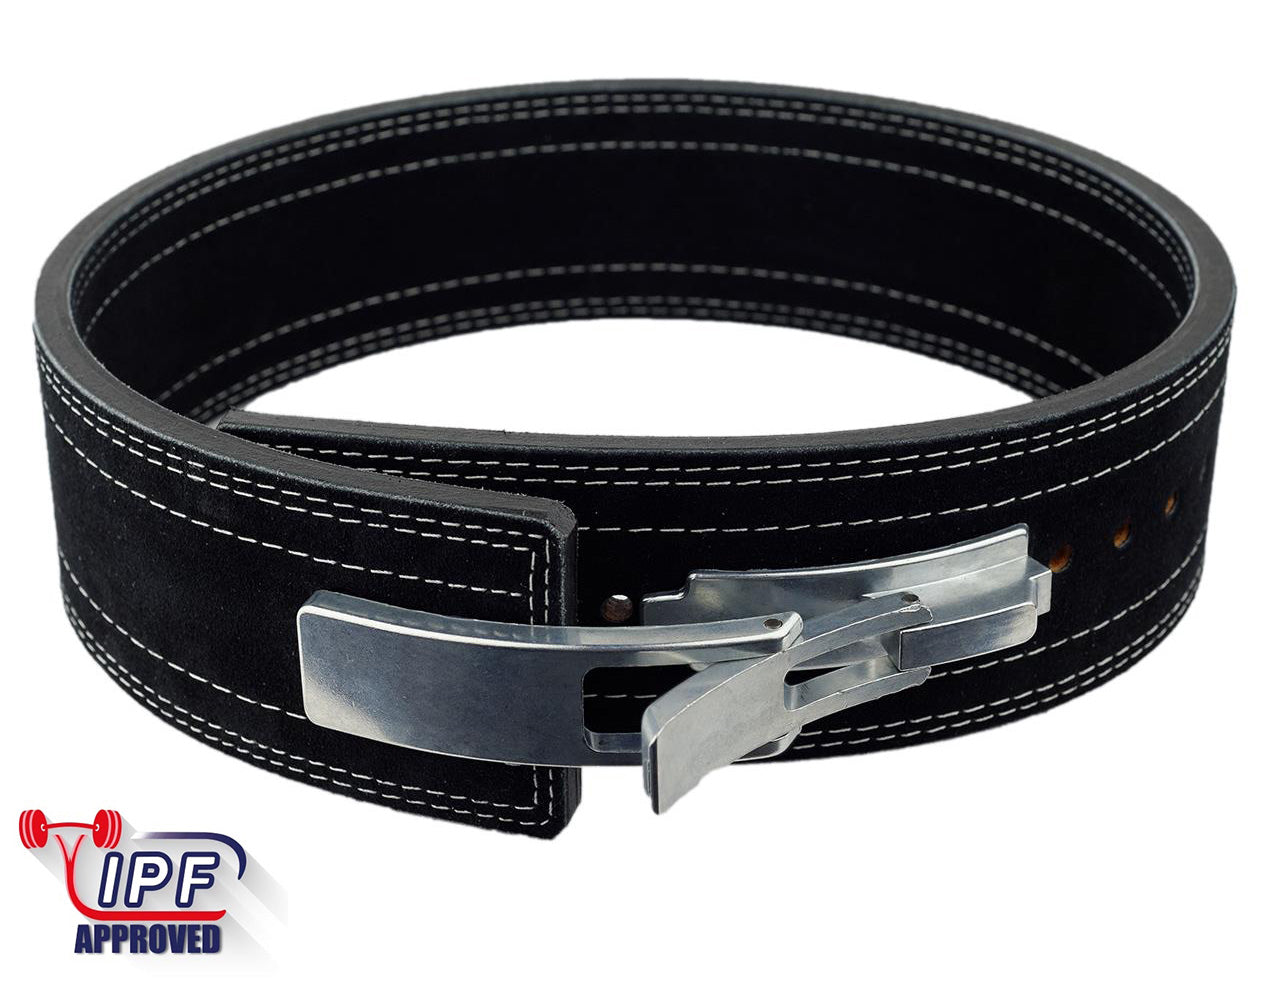 INZER FOREVER LEVER BELT 13MM | Your Power Gear